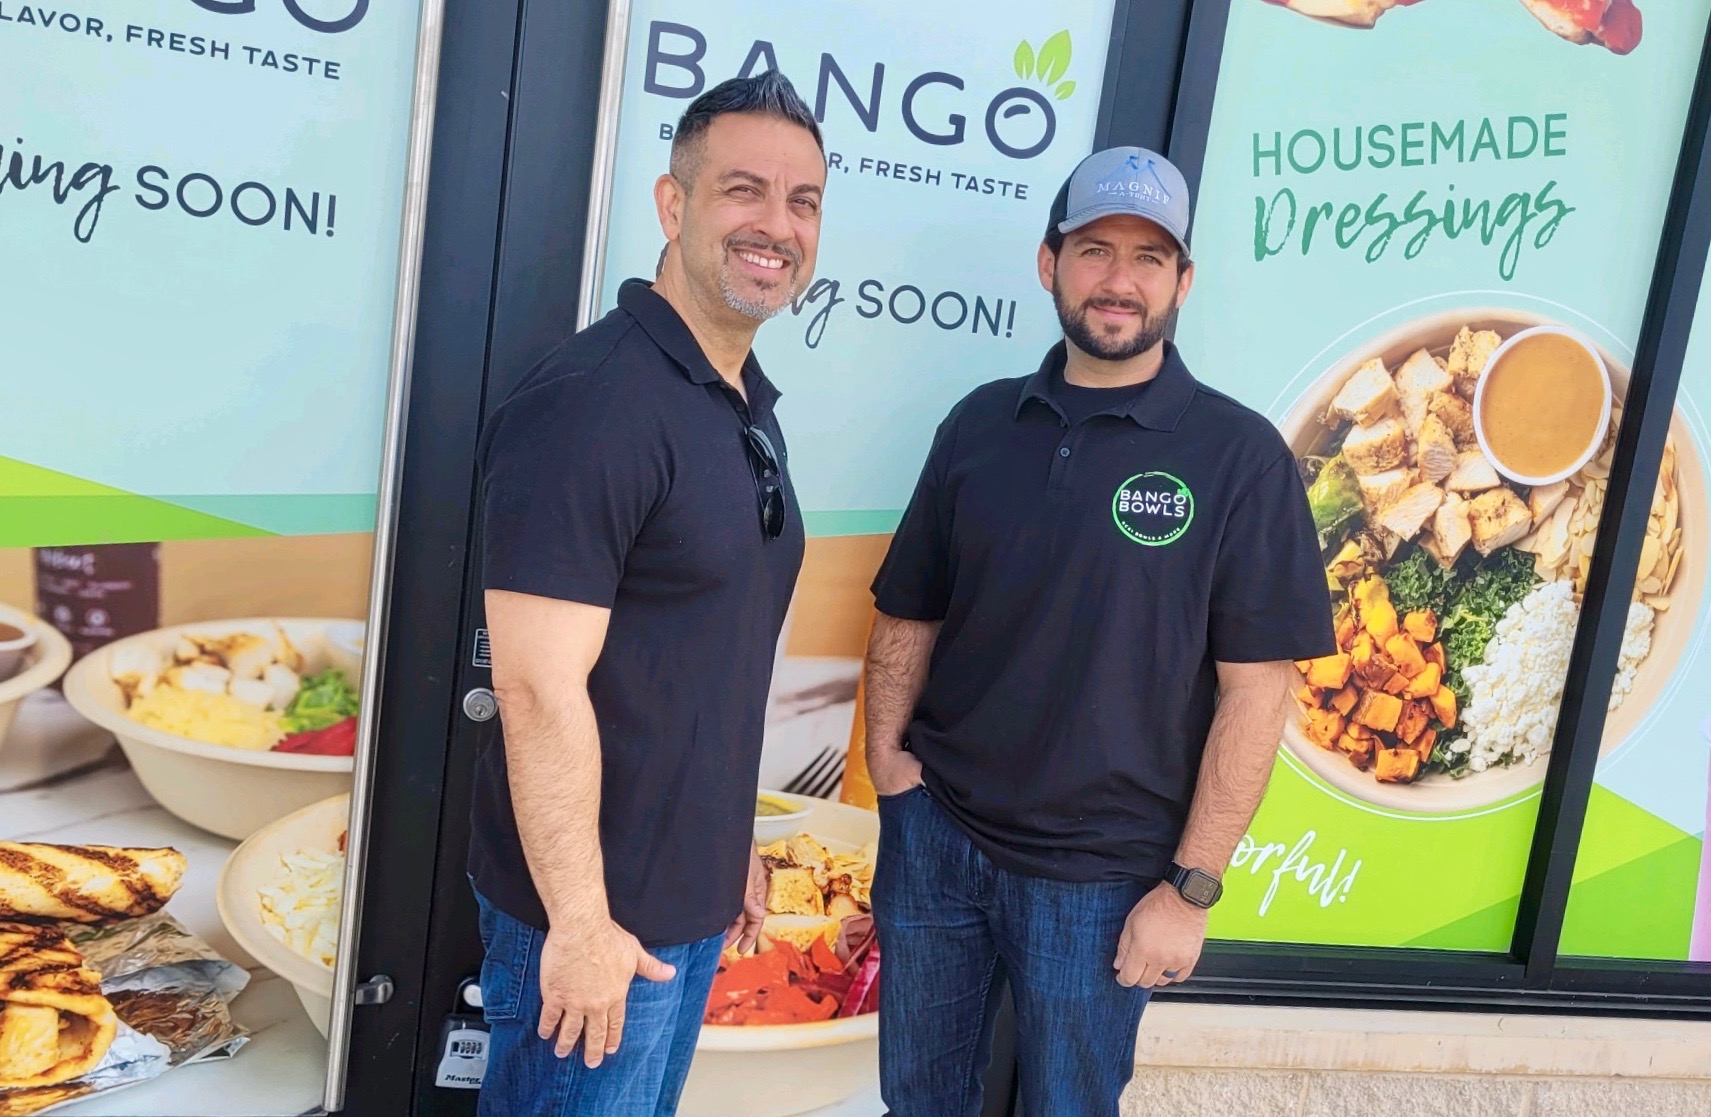 Bango Bowls owners in Hauppauge